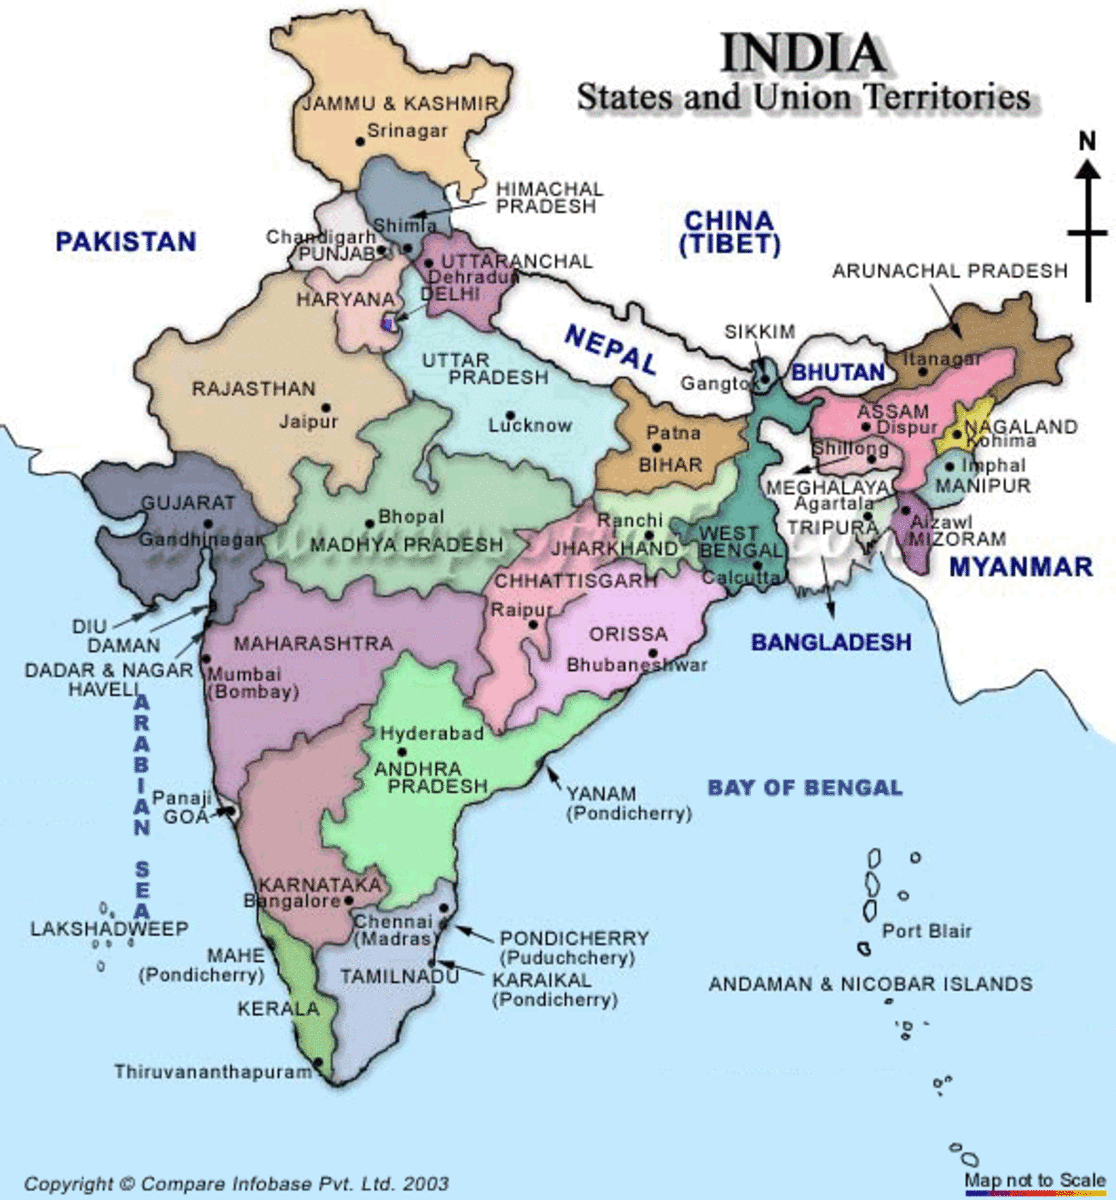 The Linguistic Diversity of India: Southern States